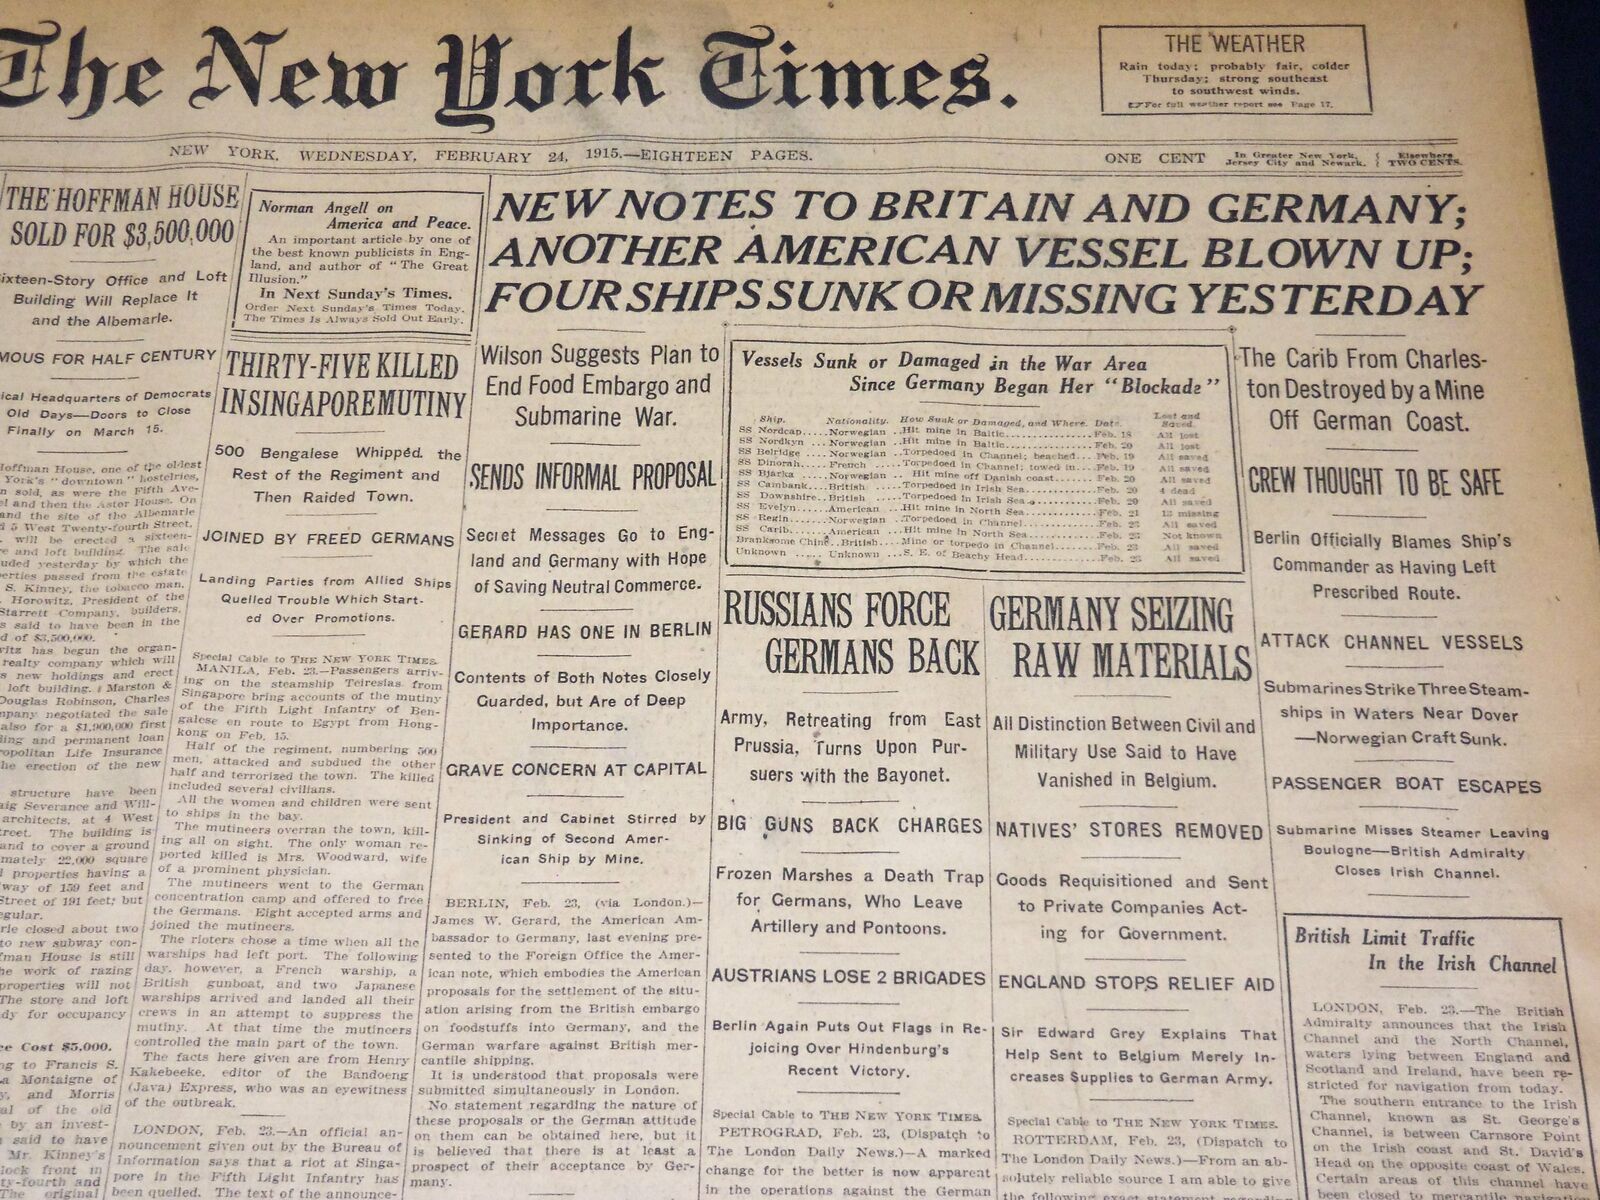 1915 FEBRUARY 24 NEW YORK TIMES - NEW NOTES TO BRITAIN AND GERMANY - NT 7775